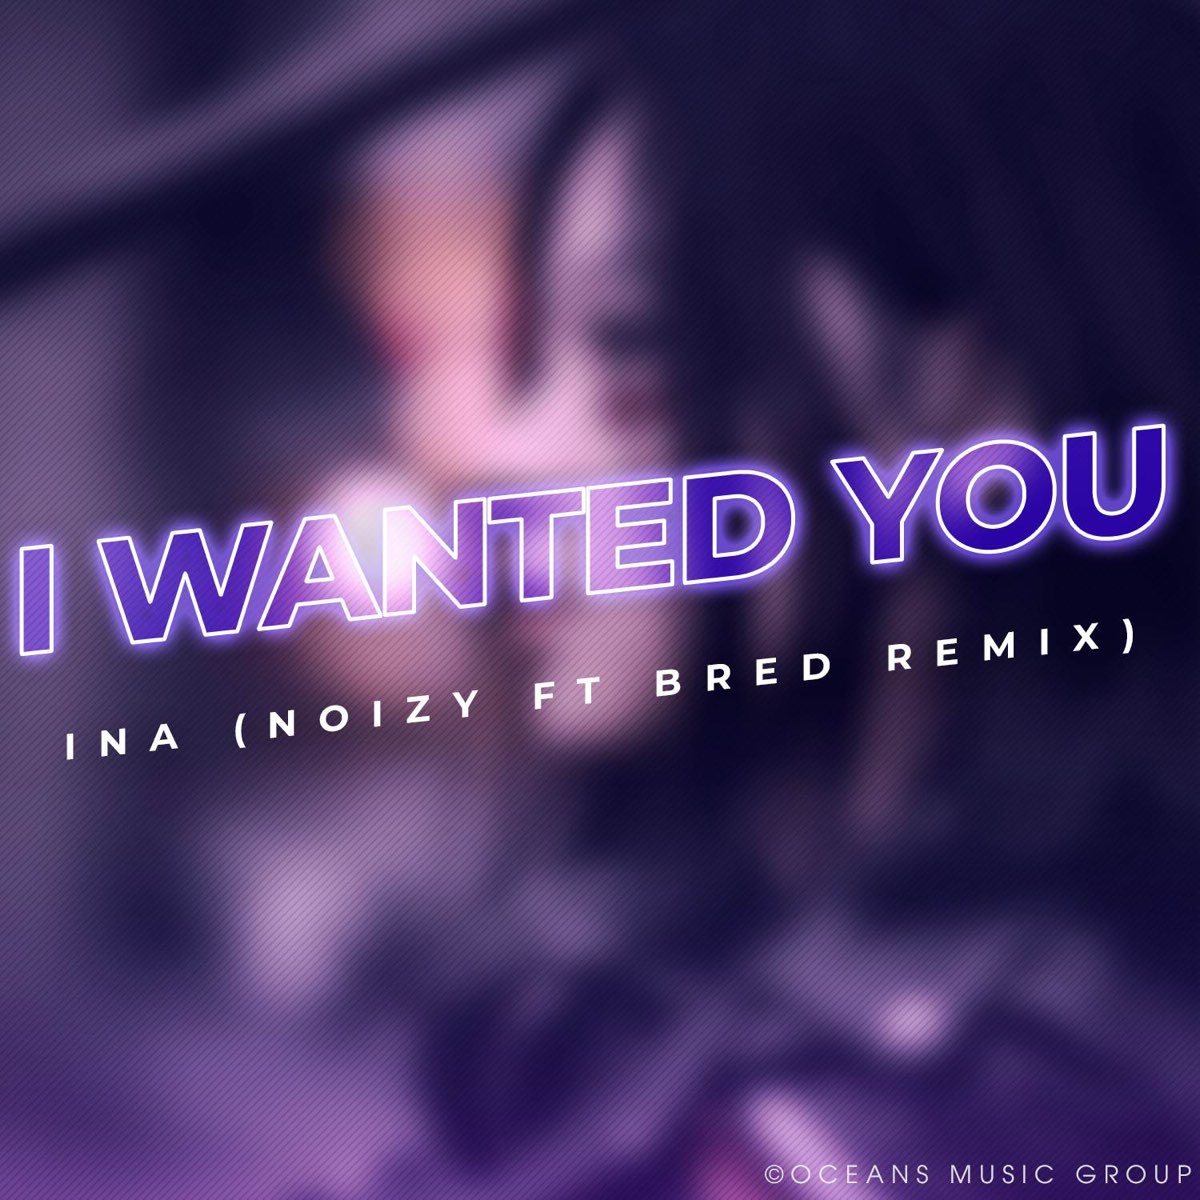 Ina featuring Noizy & BRED — I Wanted You (Remix) cover artwork